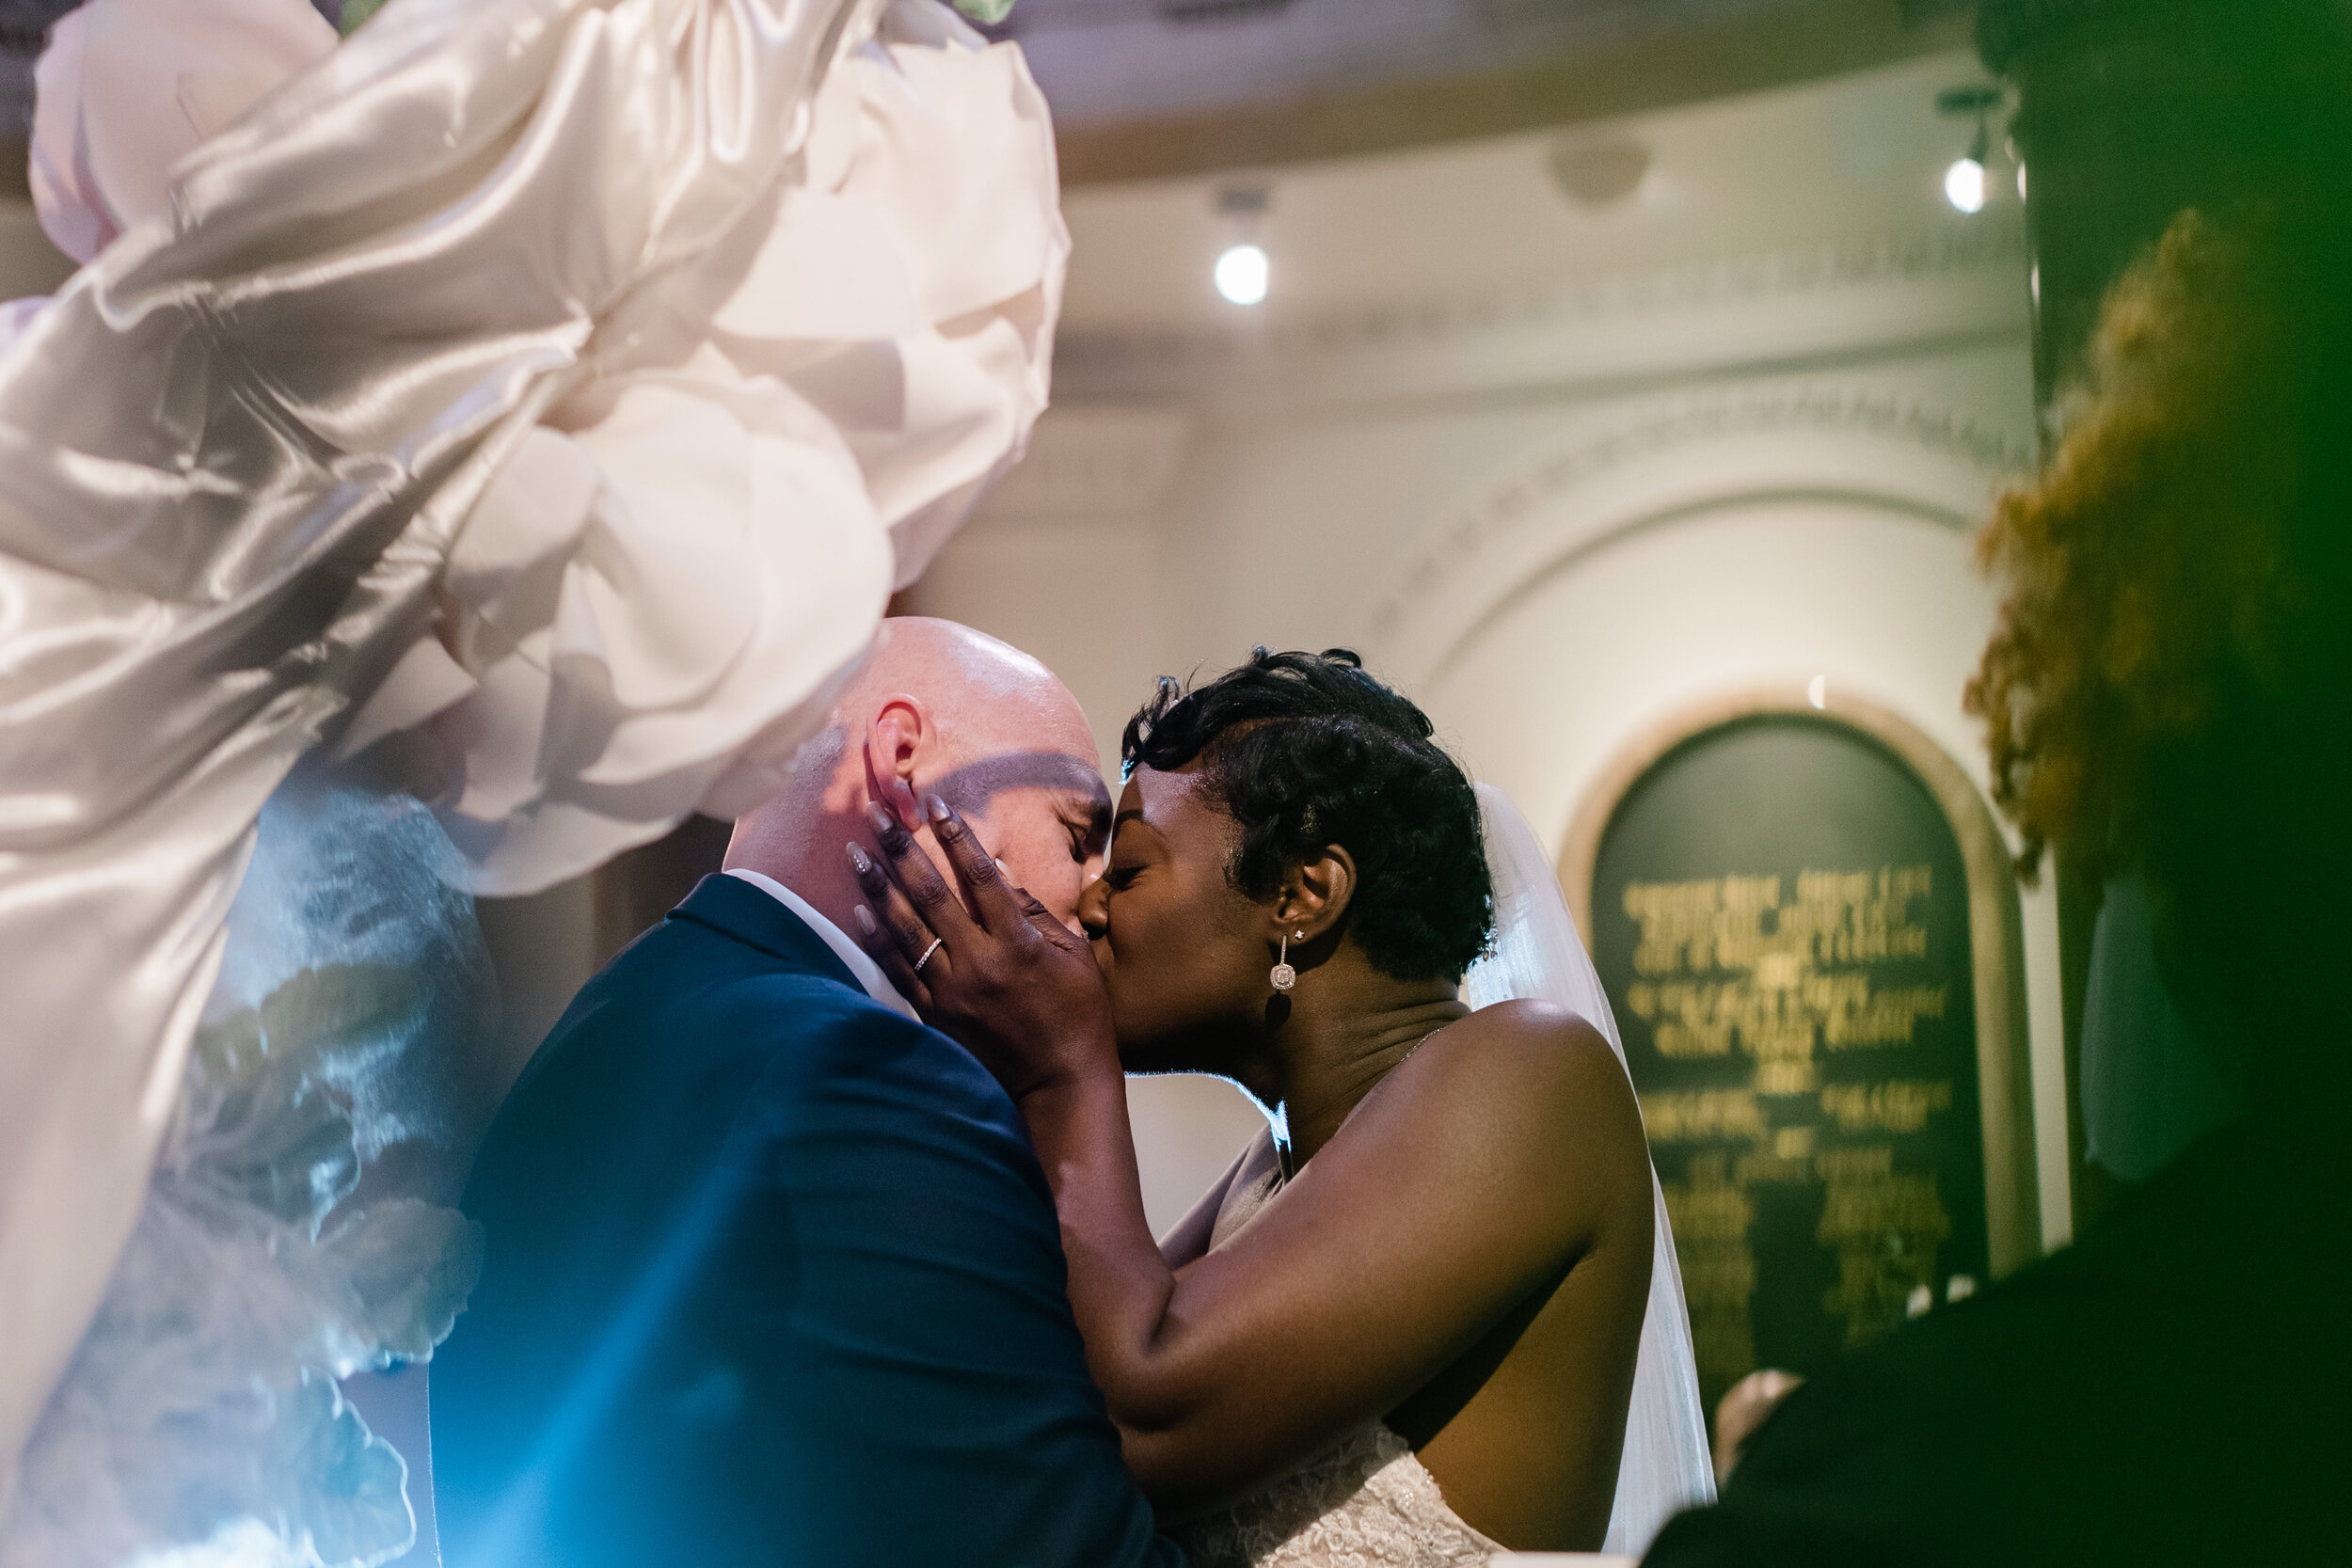 get married in baltimore city hall shot by megapixels media biracial couple wedding photographers maryland-74.jpg